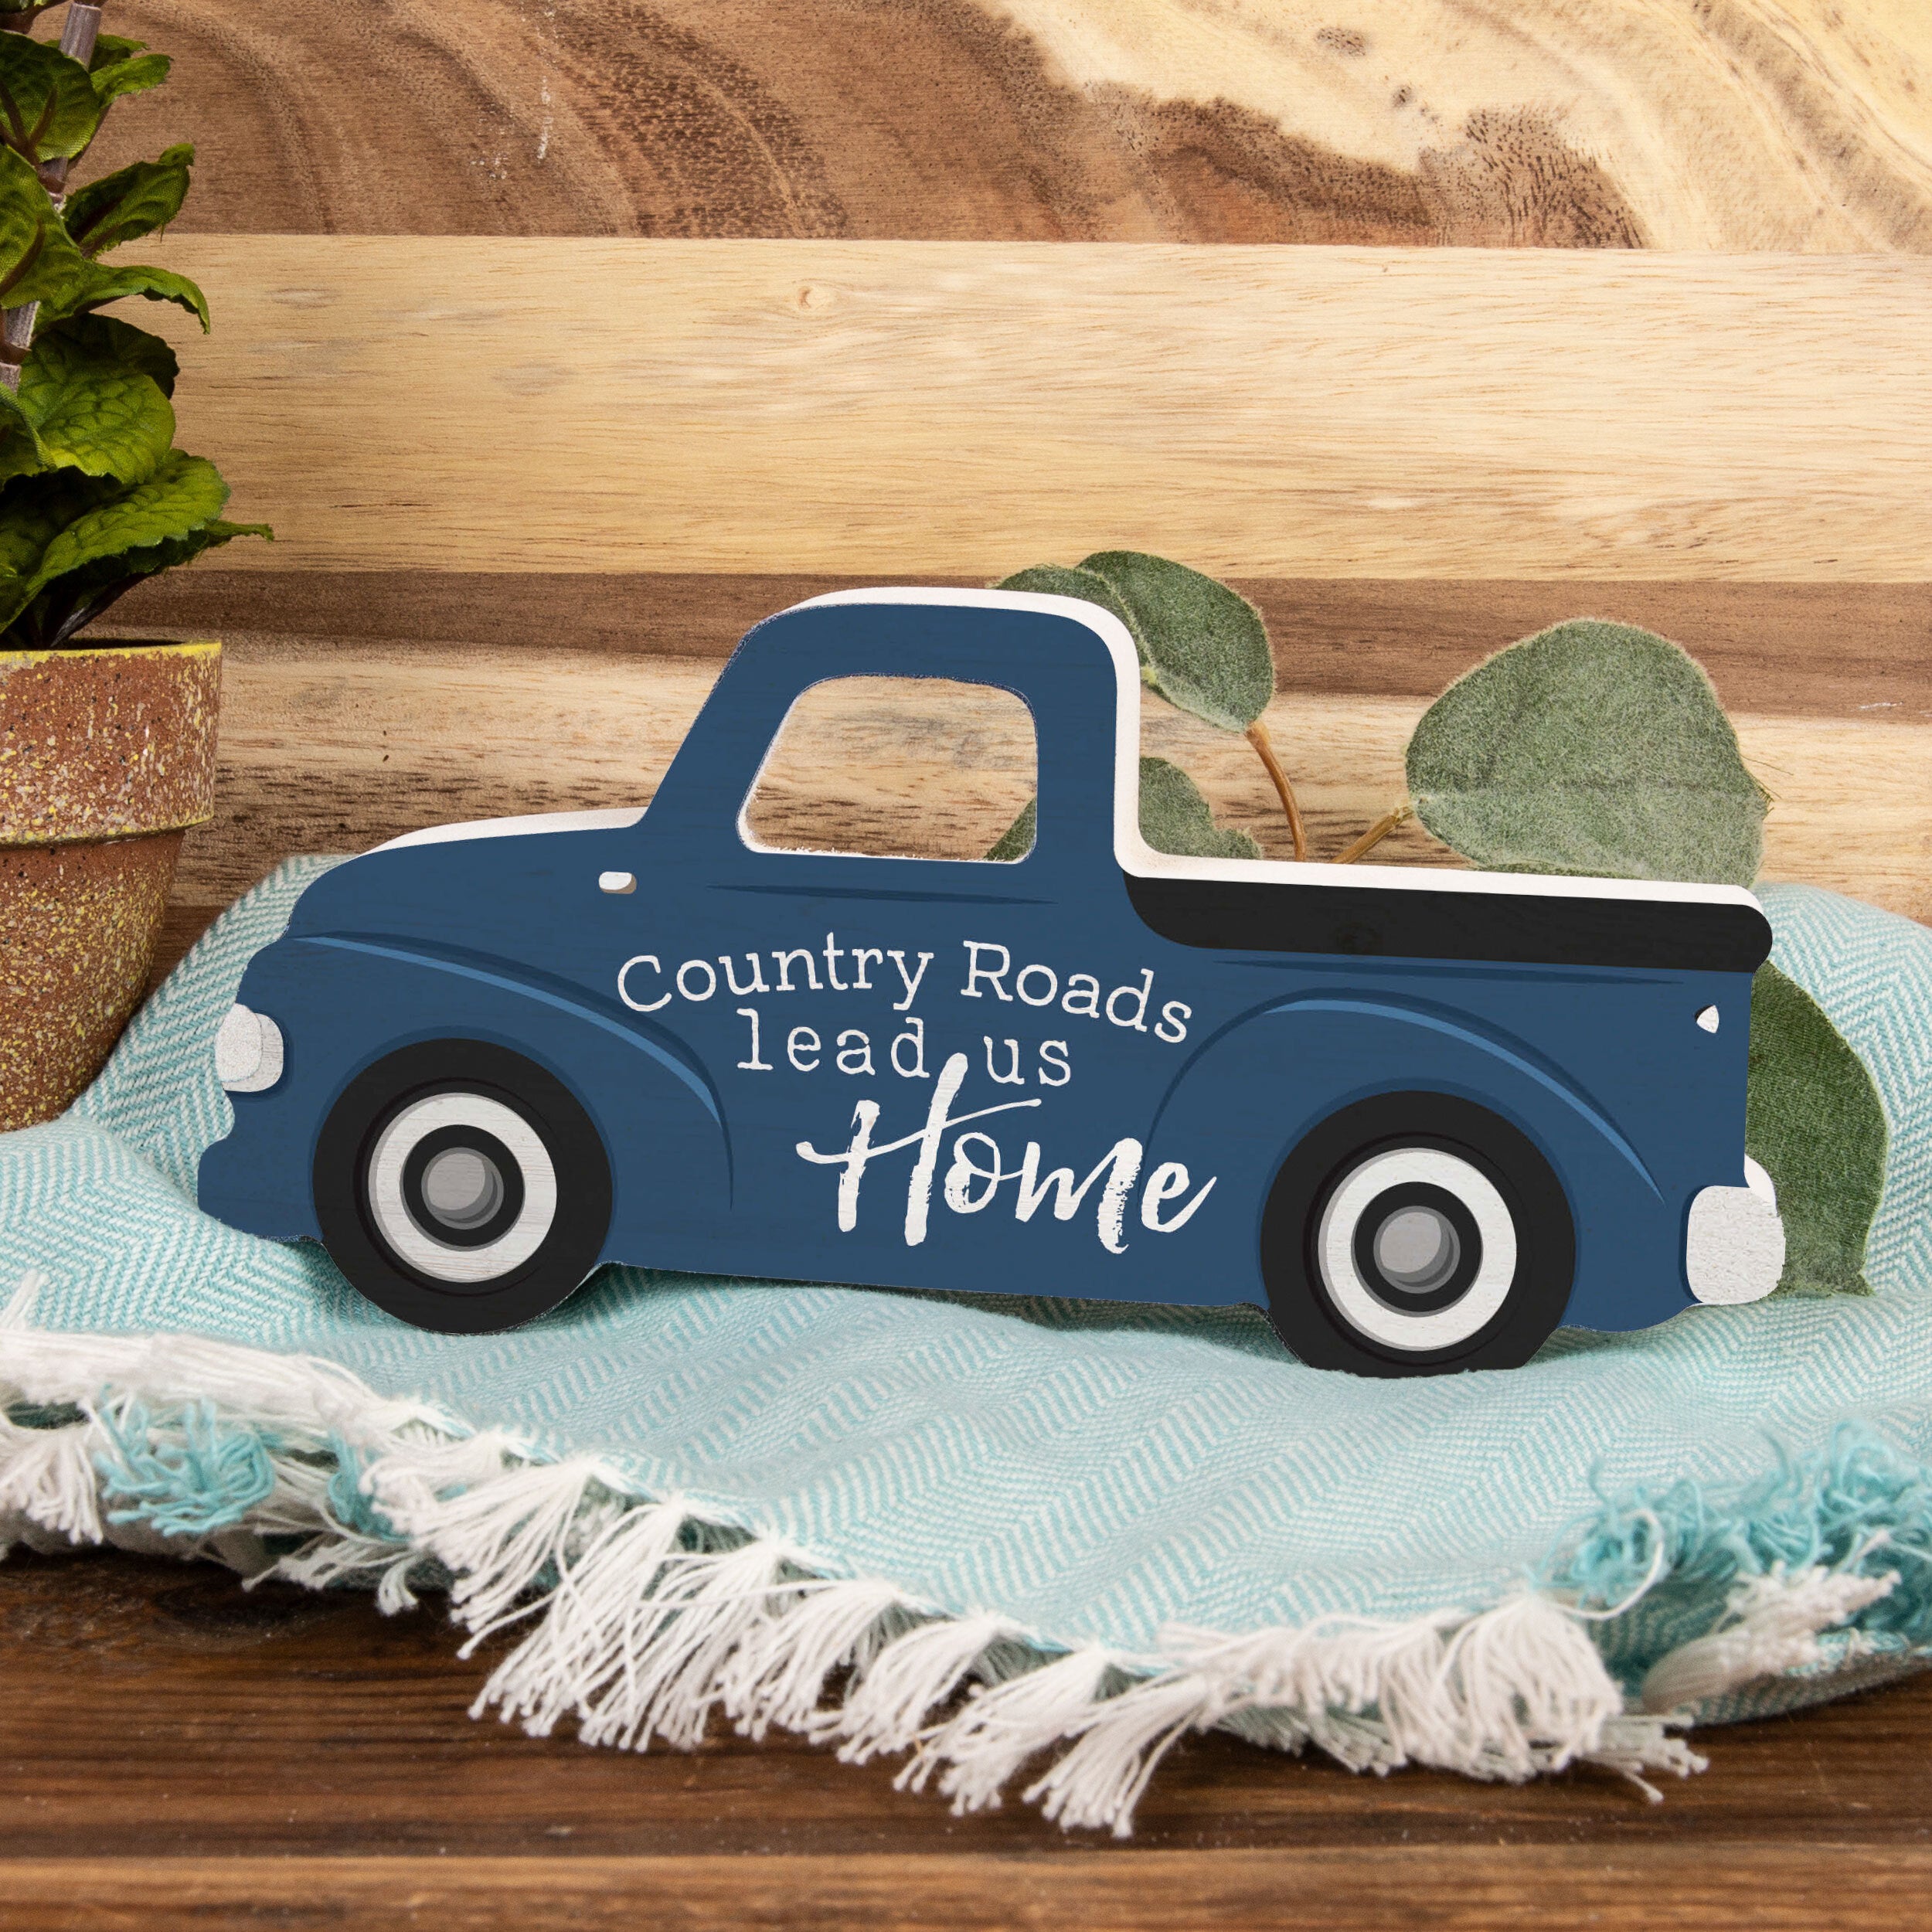 **Country Roads Lead Us Home Truck Shape Décor